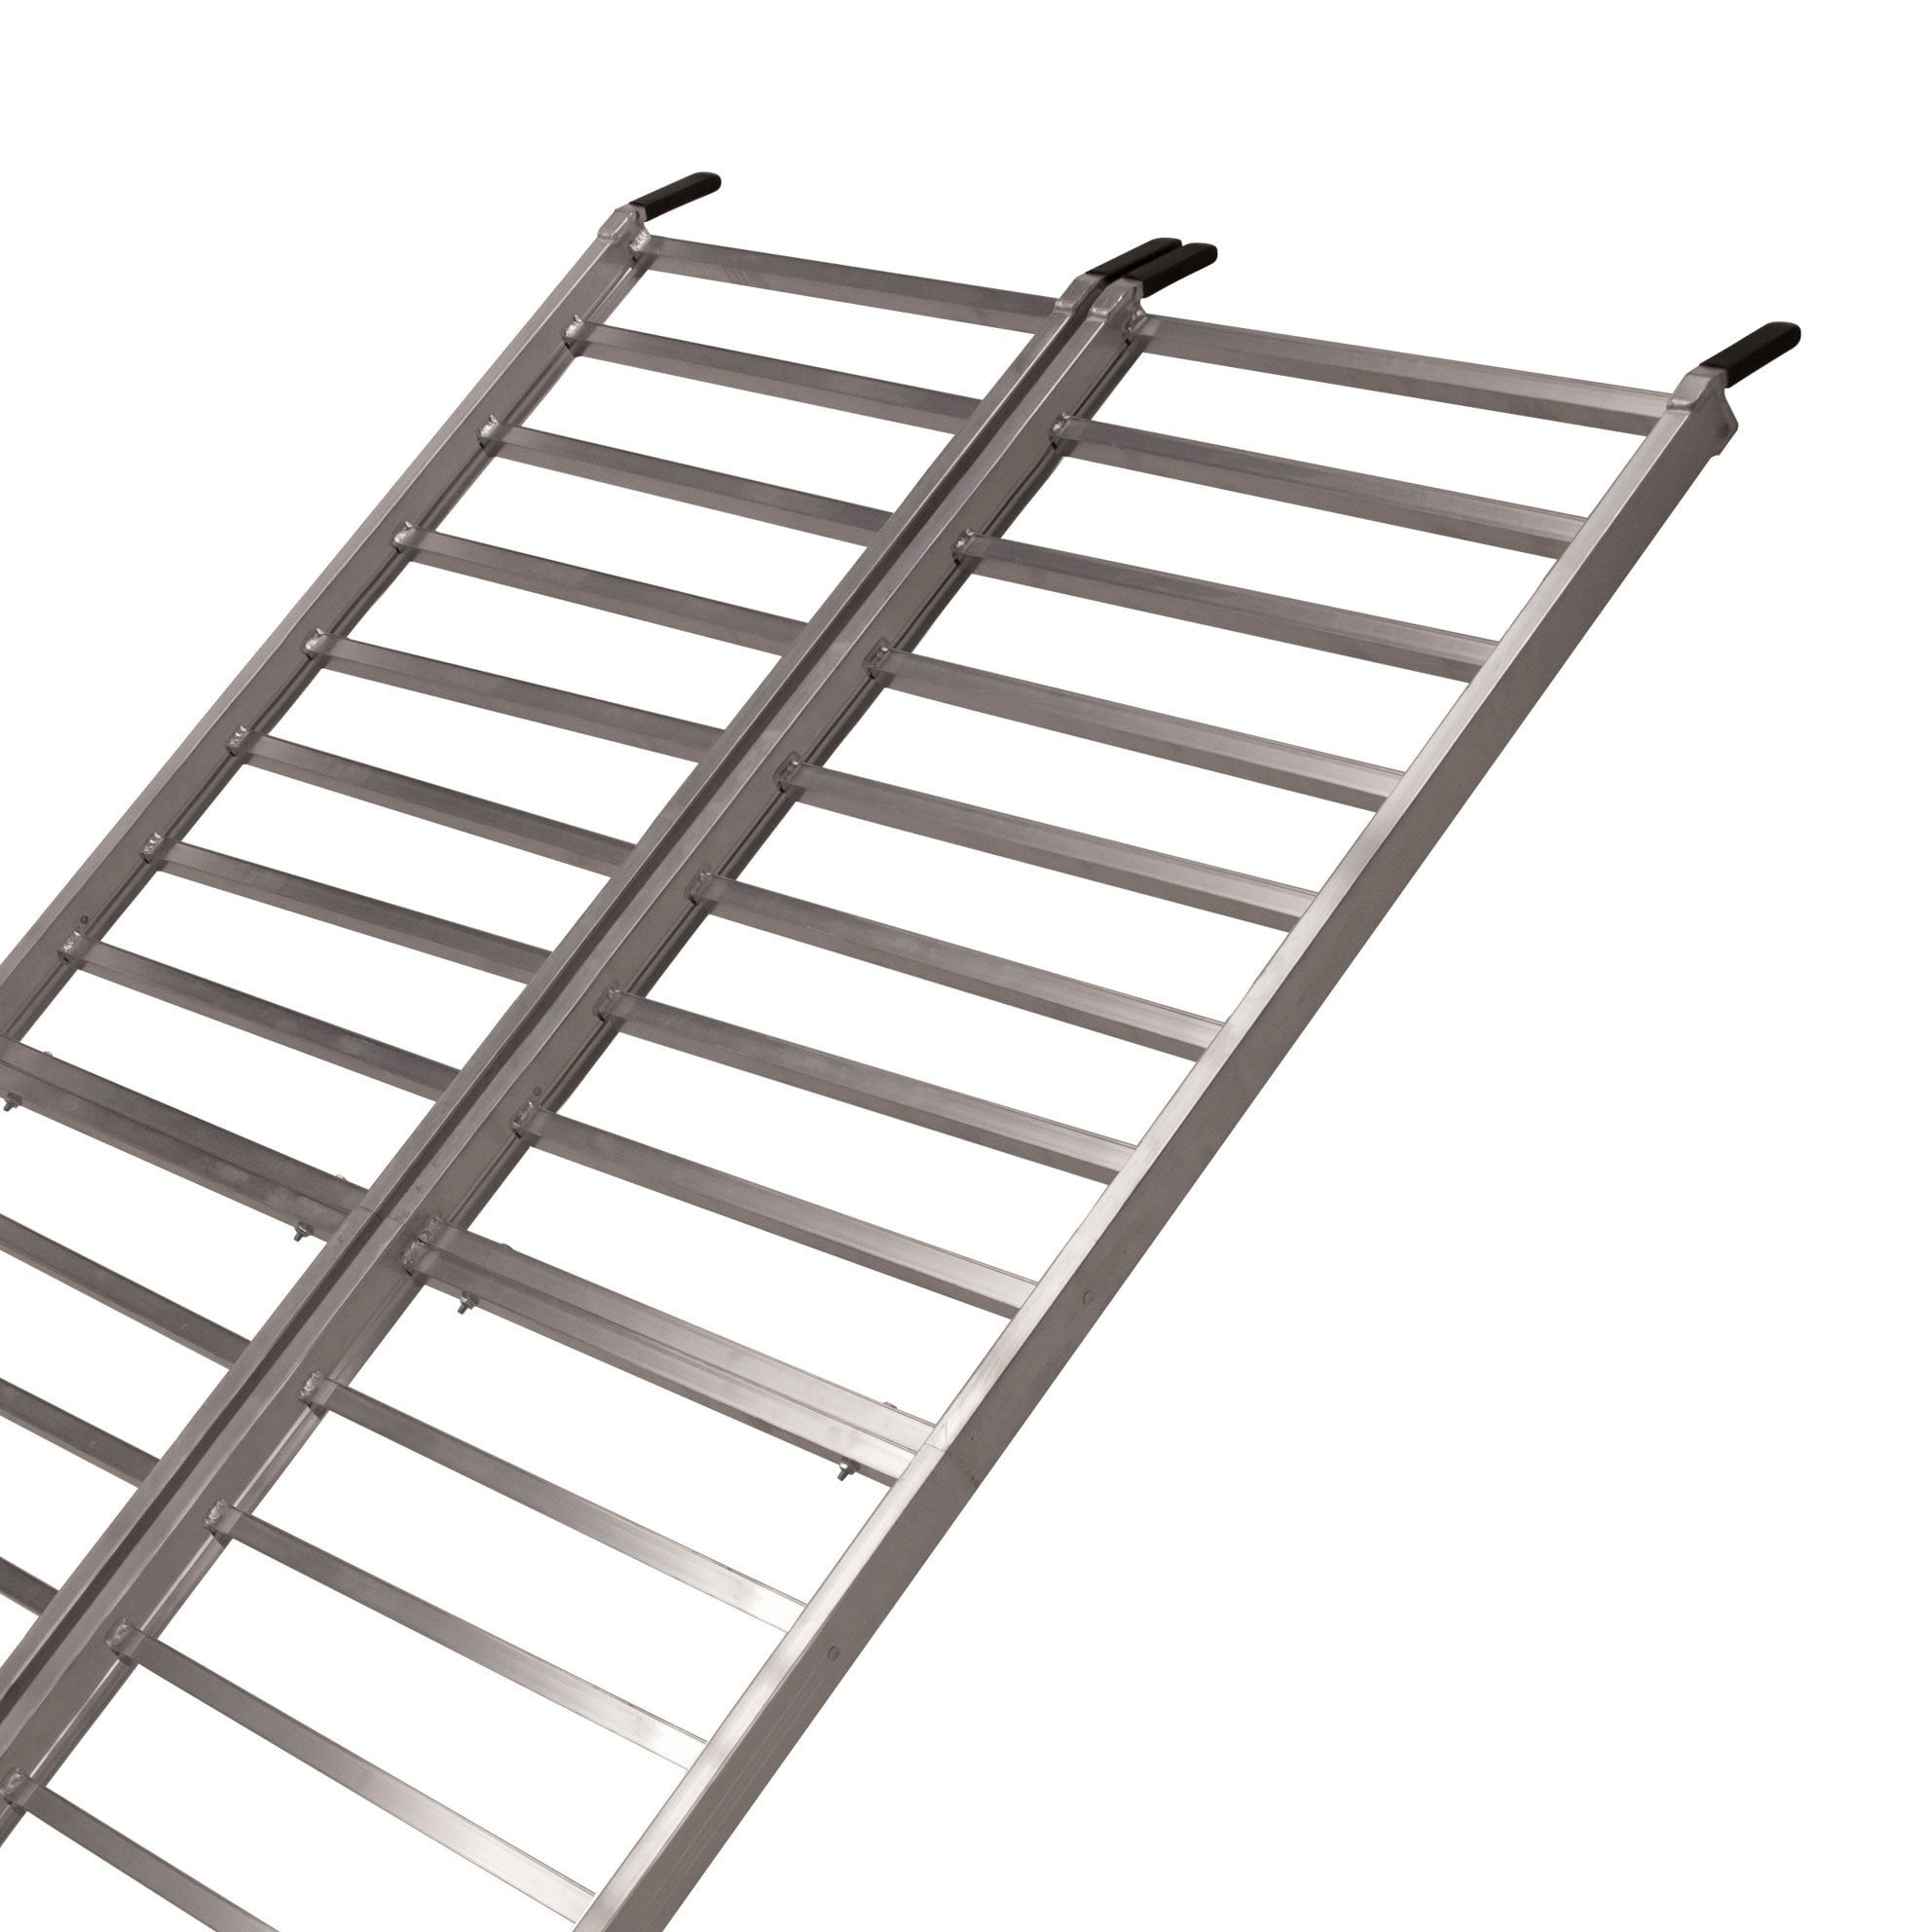 Details about   Yutrax TX108 85 x 50 Inch 1600 Pound Aluminum Bi-Fold Truck Bed ATV Loading Ramp 